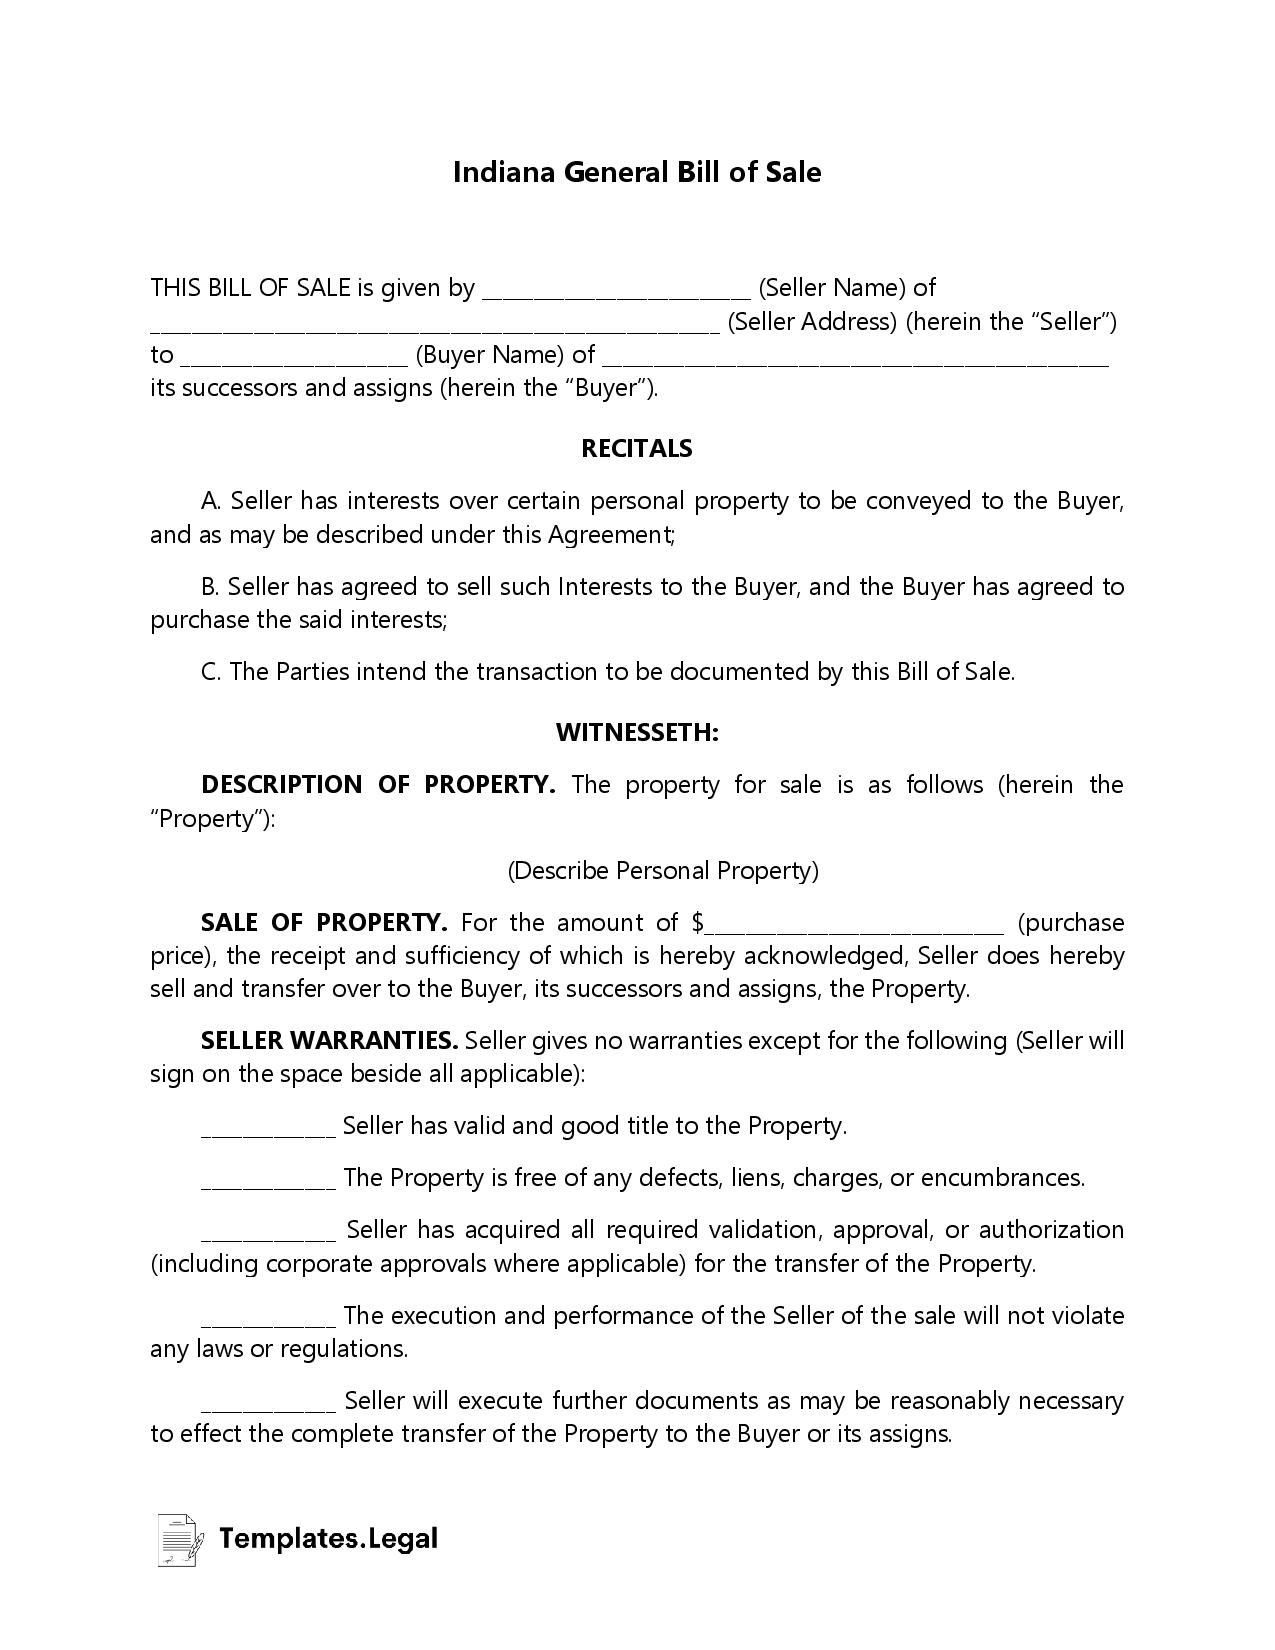 Indiana General Bill of Sale - Templates.Legal